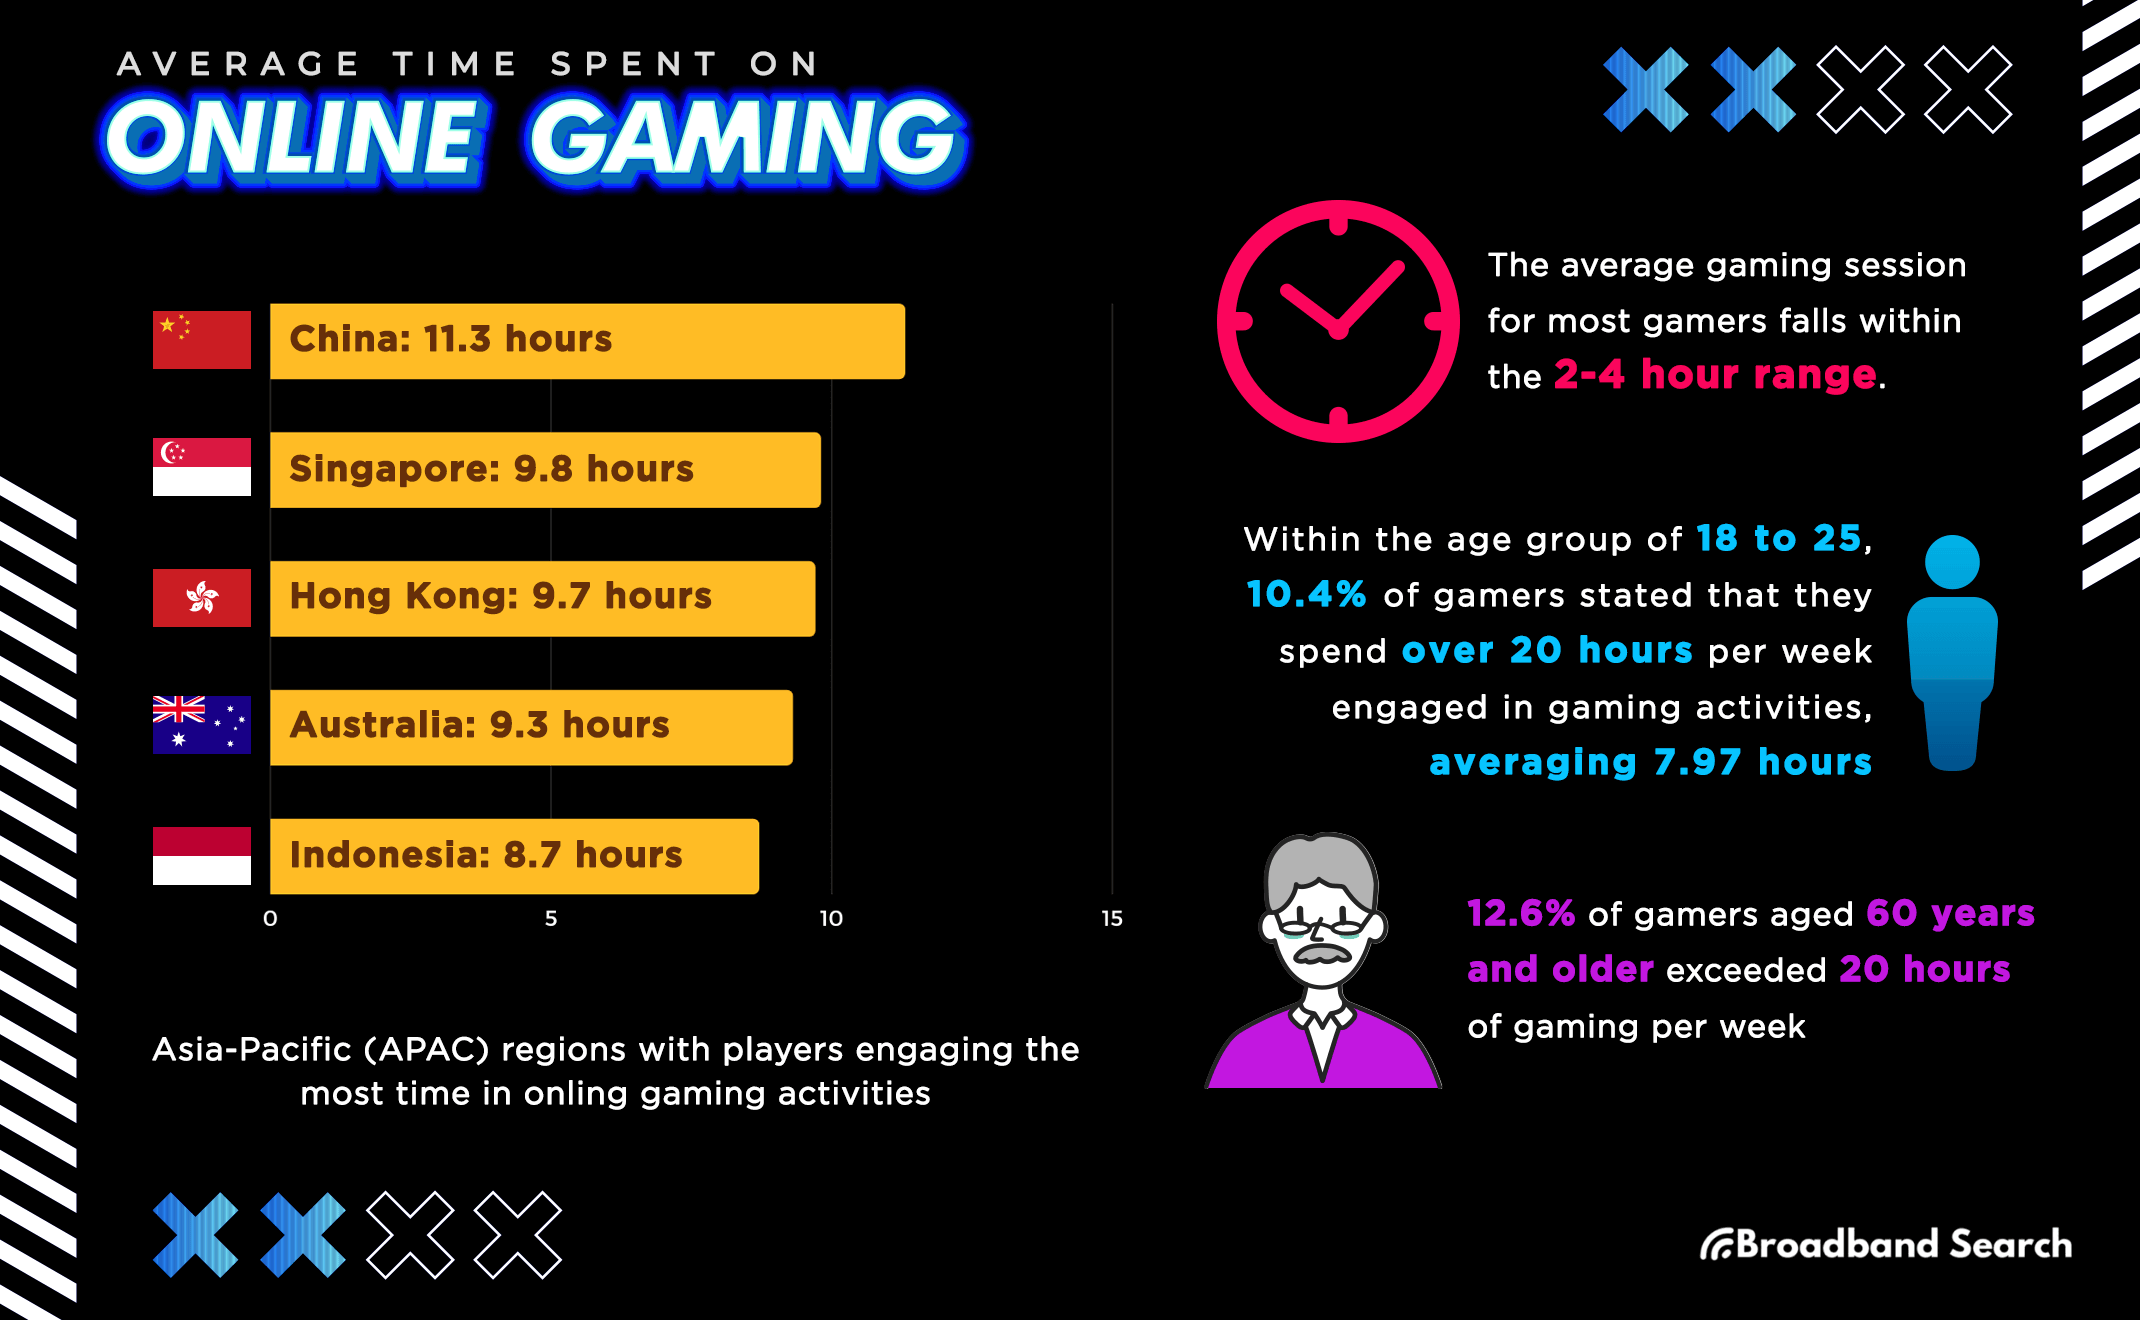 An infographic showing the average time spent on online gaming